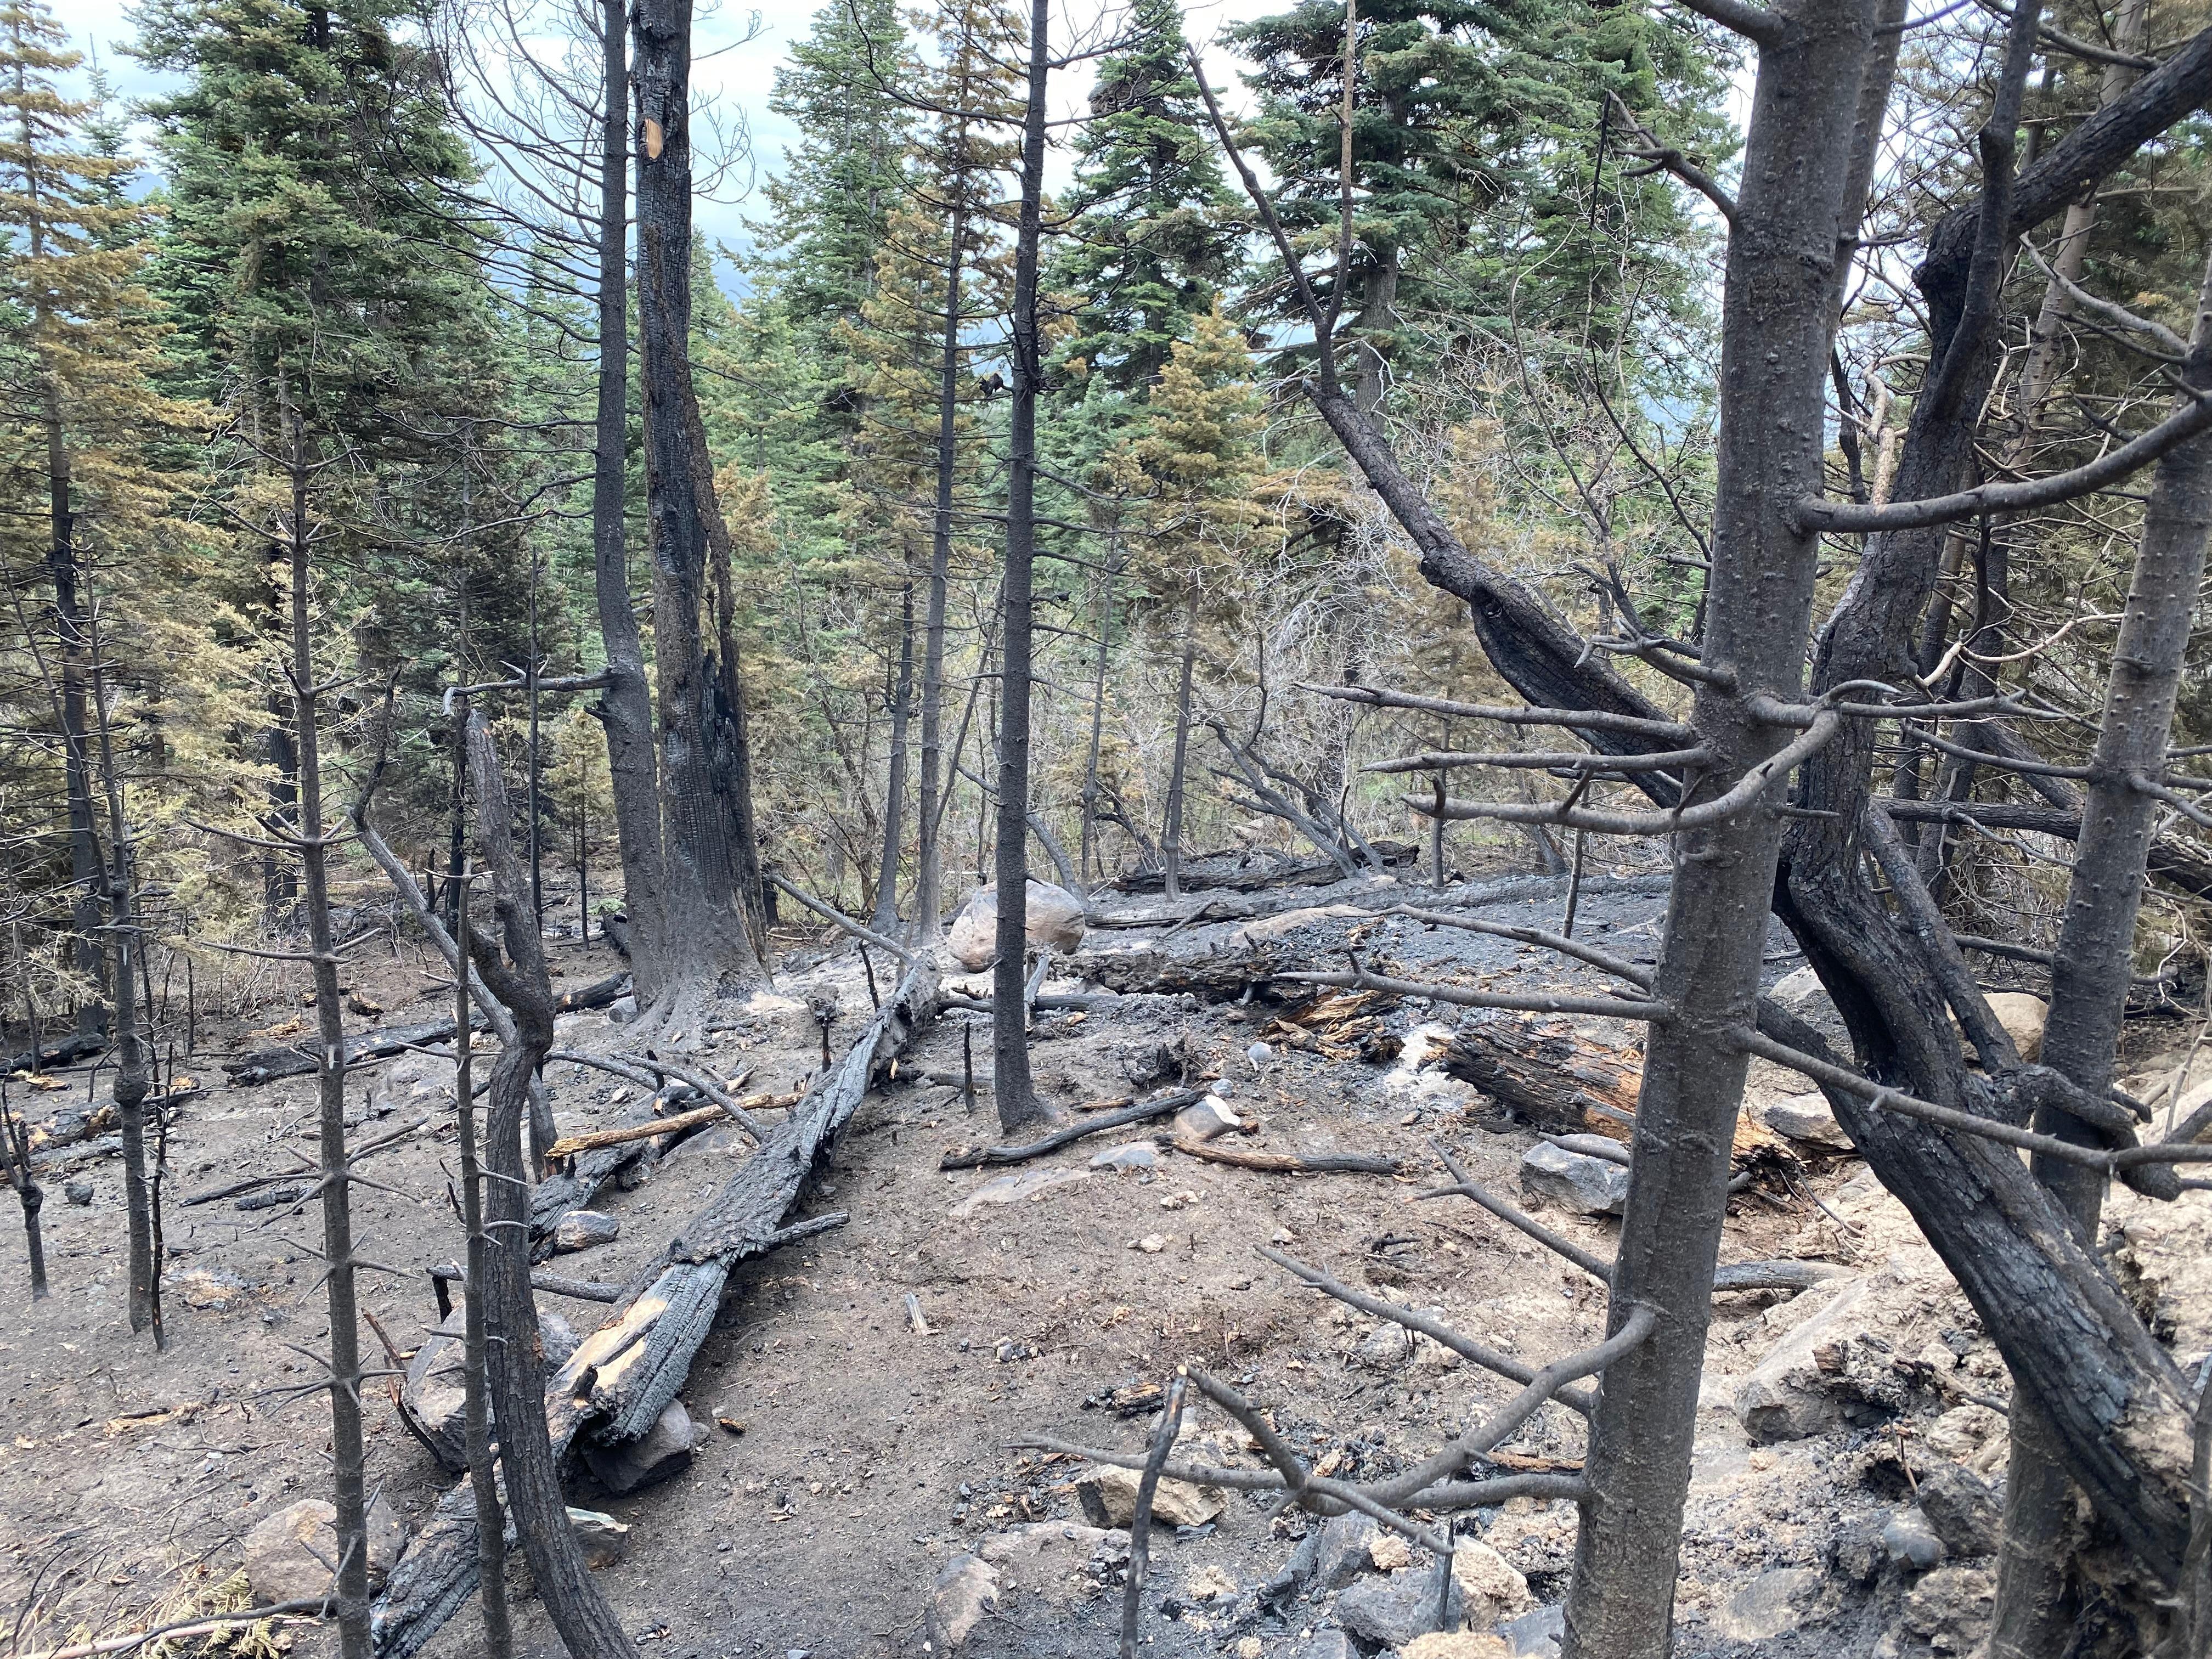 In the foreground, tree stems and the ground are bare of needles or other vegetation, appearing ashy and grey. In the background, past the edge of the fire scar, some trees are scorched by the heat of the fire, and other trees remain green.